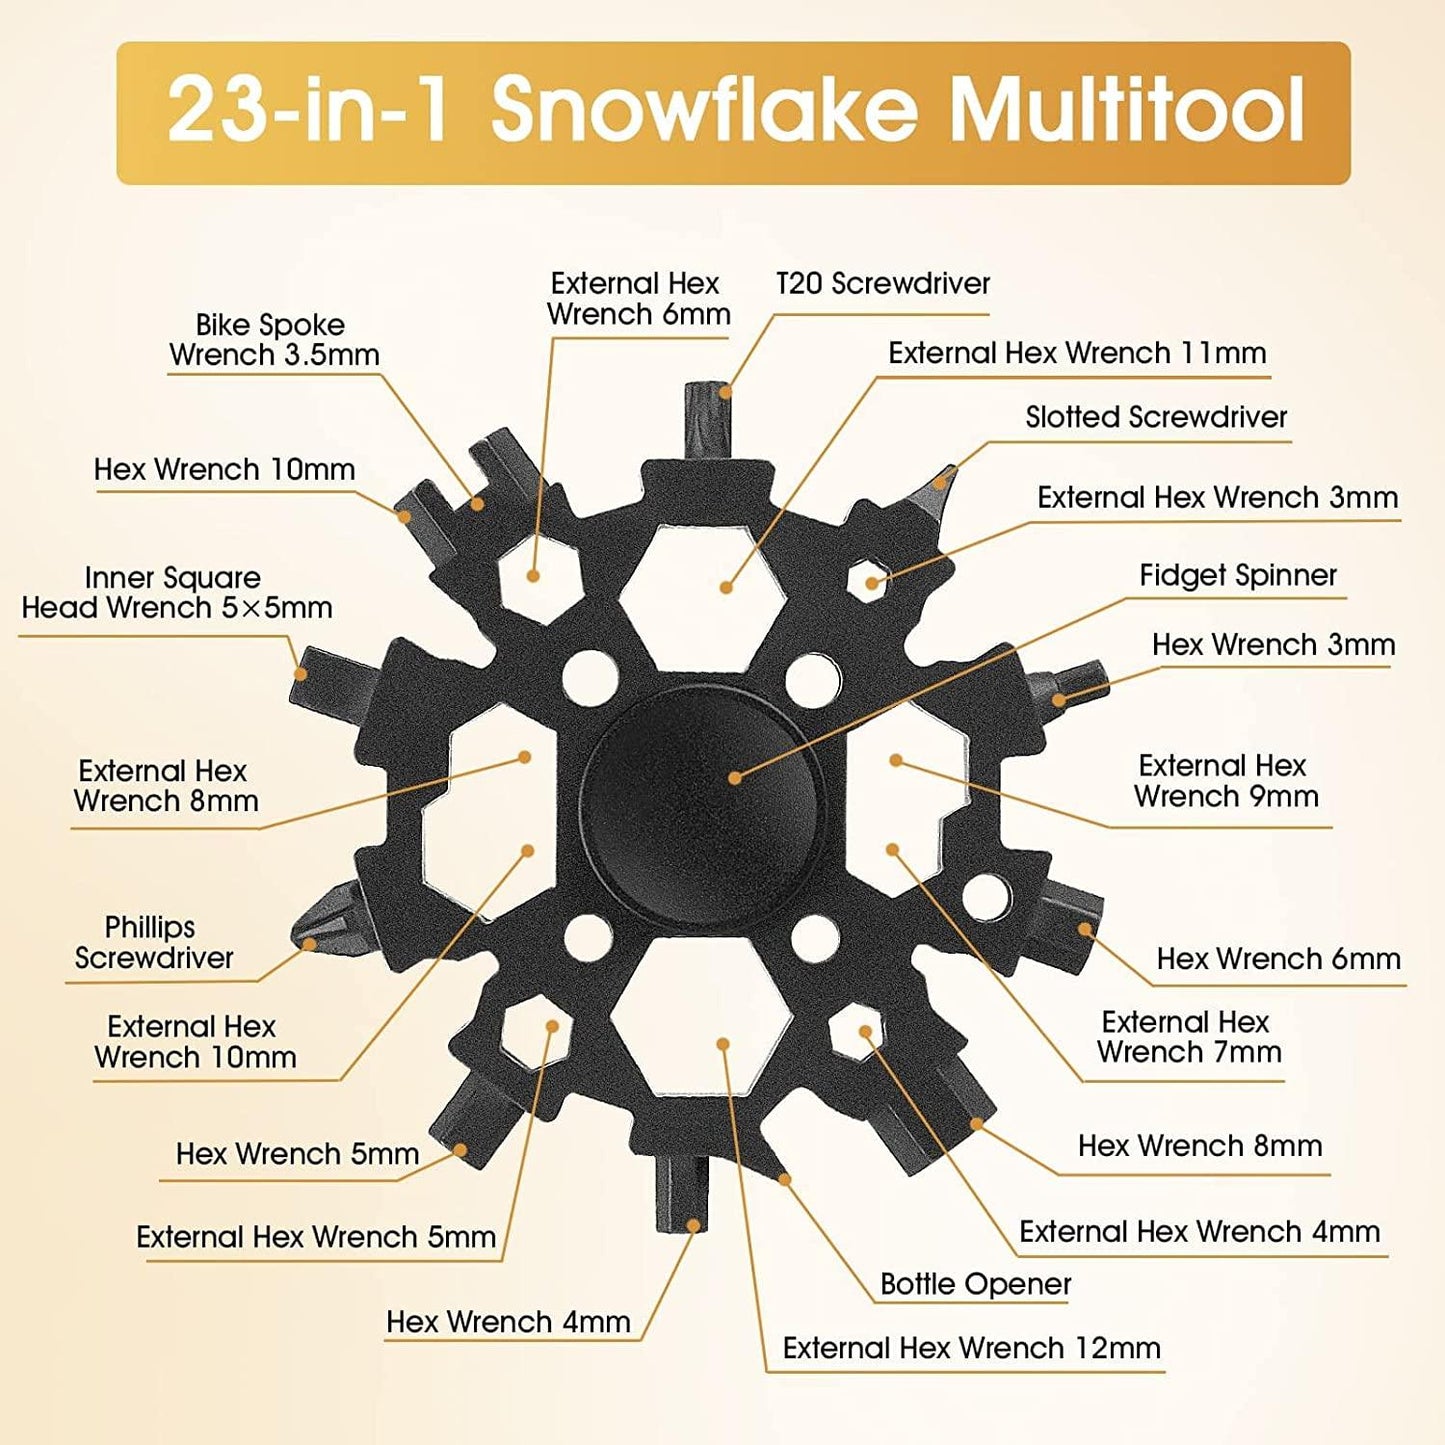 23-IN-1 Snowflake Multitool With Fidget Spinner, Gifts for Him Boyfriend Husband Men, Stainless Steel Multi-Tool Portable Cool Gadgets for Men, Suitable for Hiking, Camping, Home Improvement Wintory